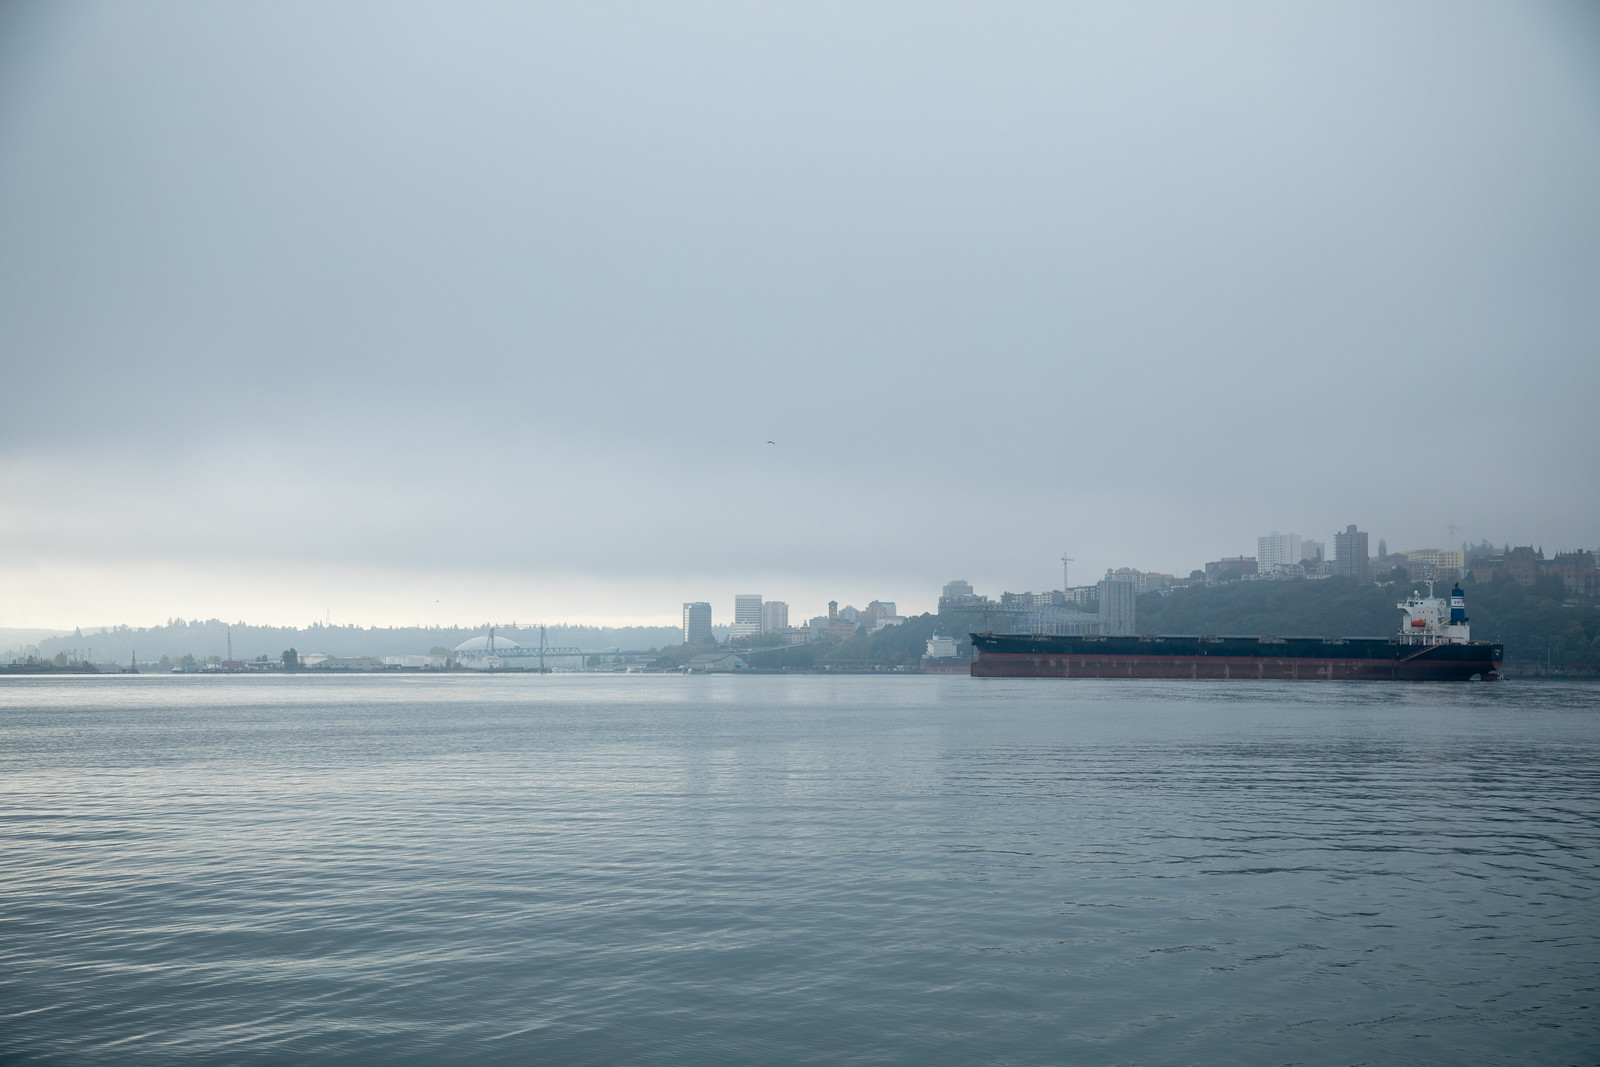 Commencement Bay, Puget Sound, bulk carrier vessel at right